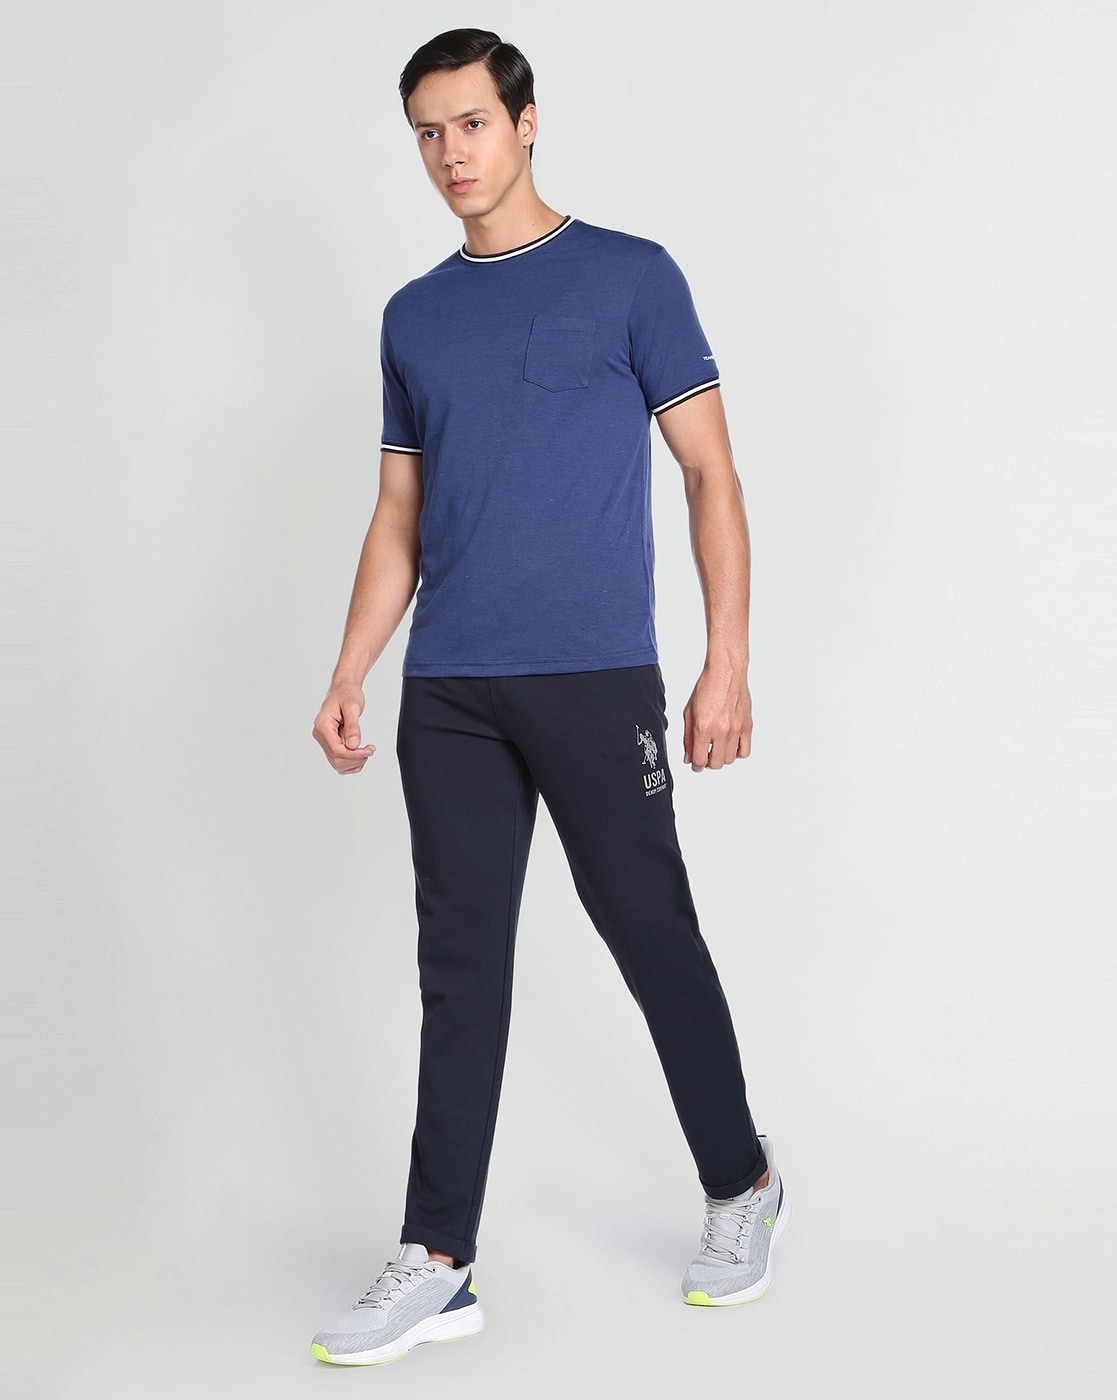 U S Polo Assn Blue Track Pant #I672 at Rs 1299.00